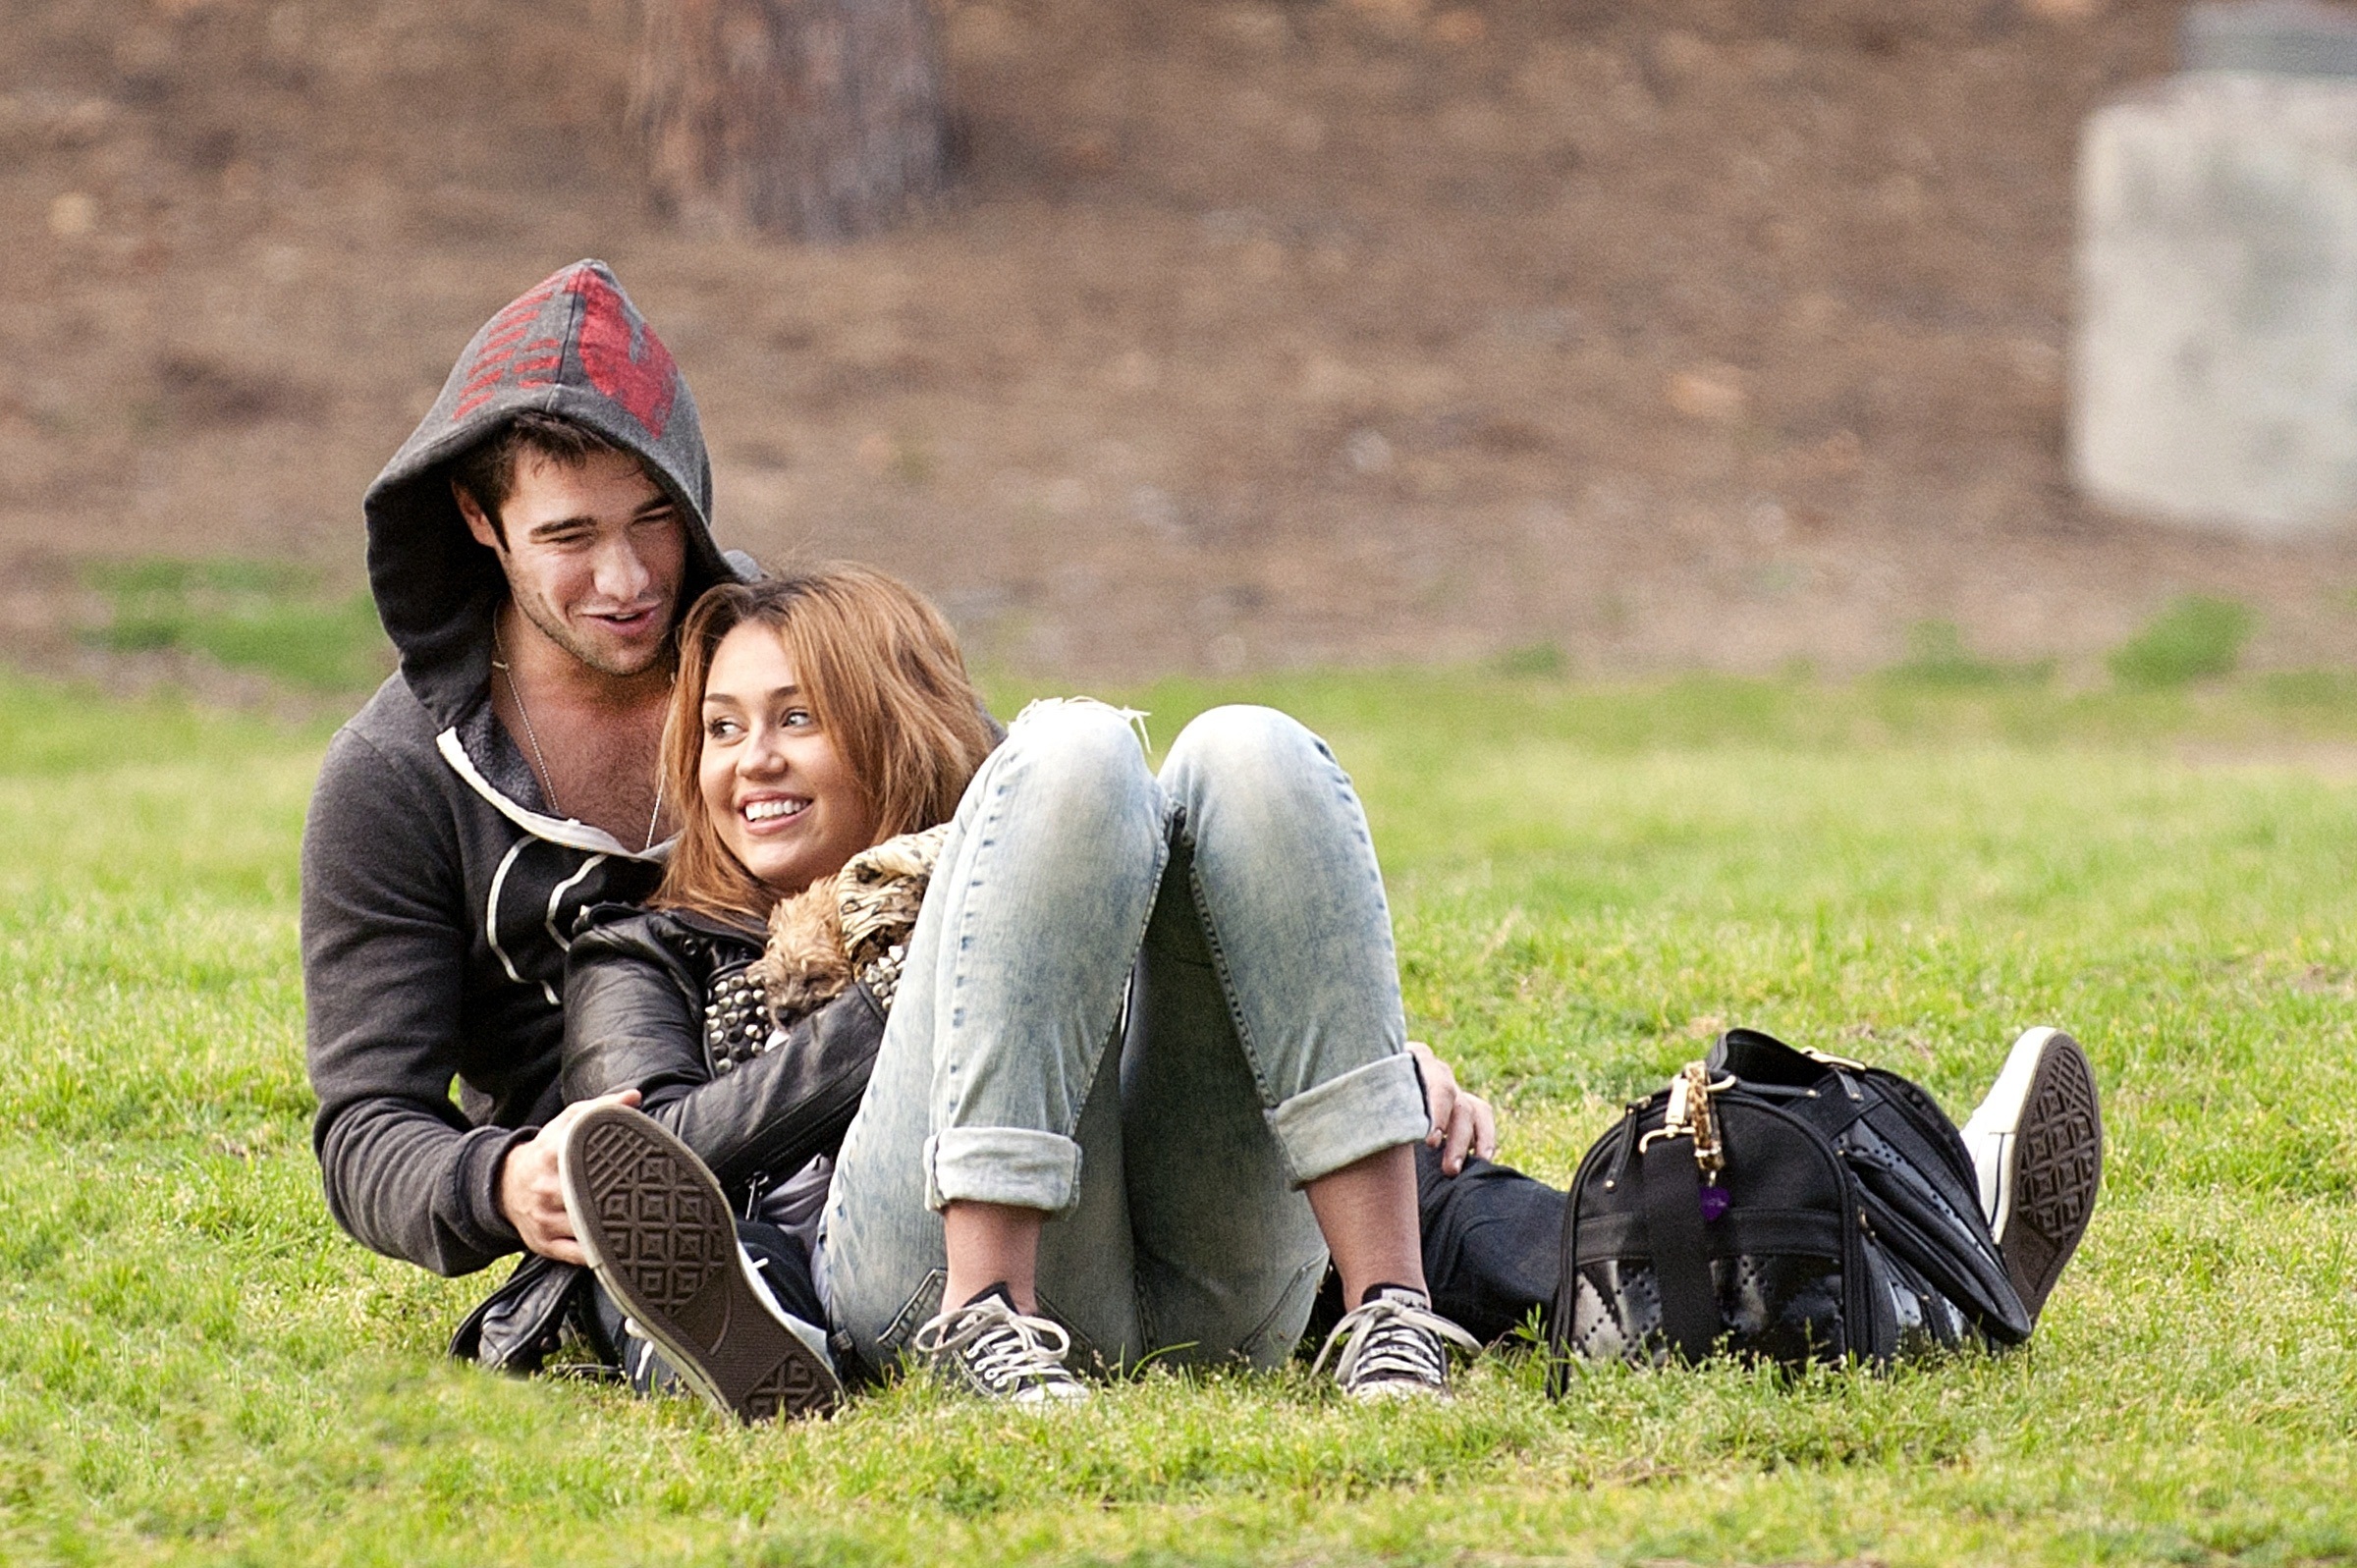 Josh And Miley So Undercover Miley Cyrus Miley Cyrus Style Miley